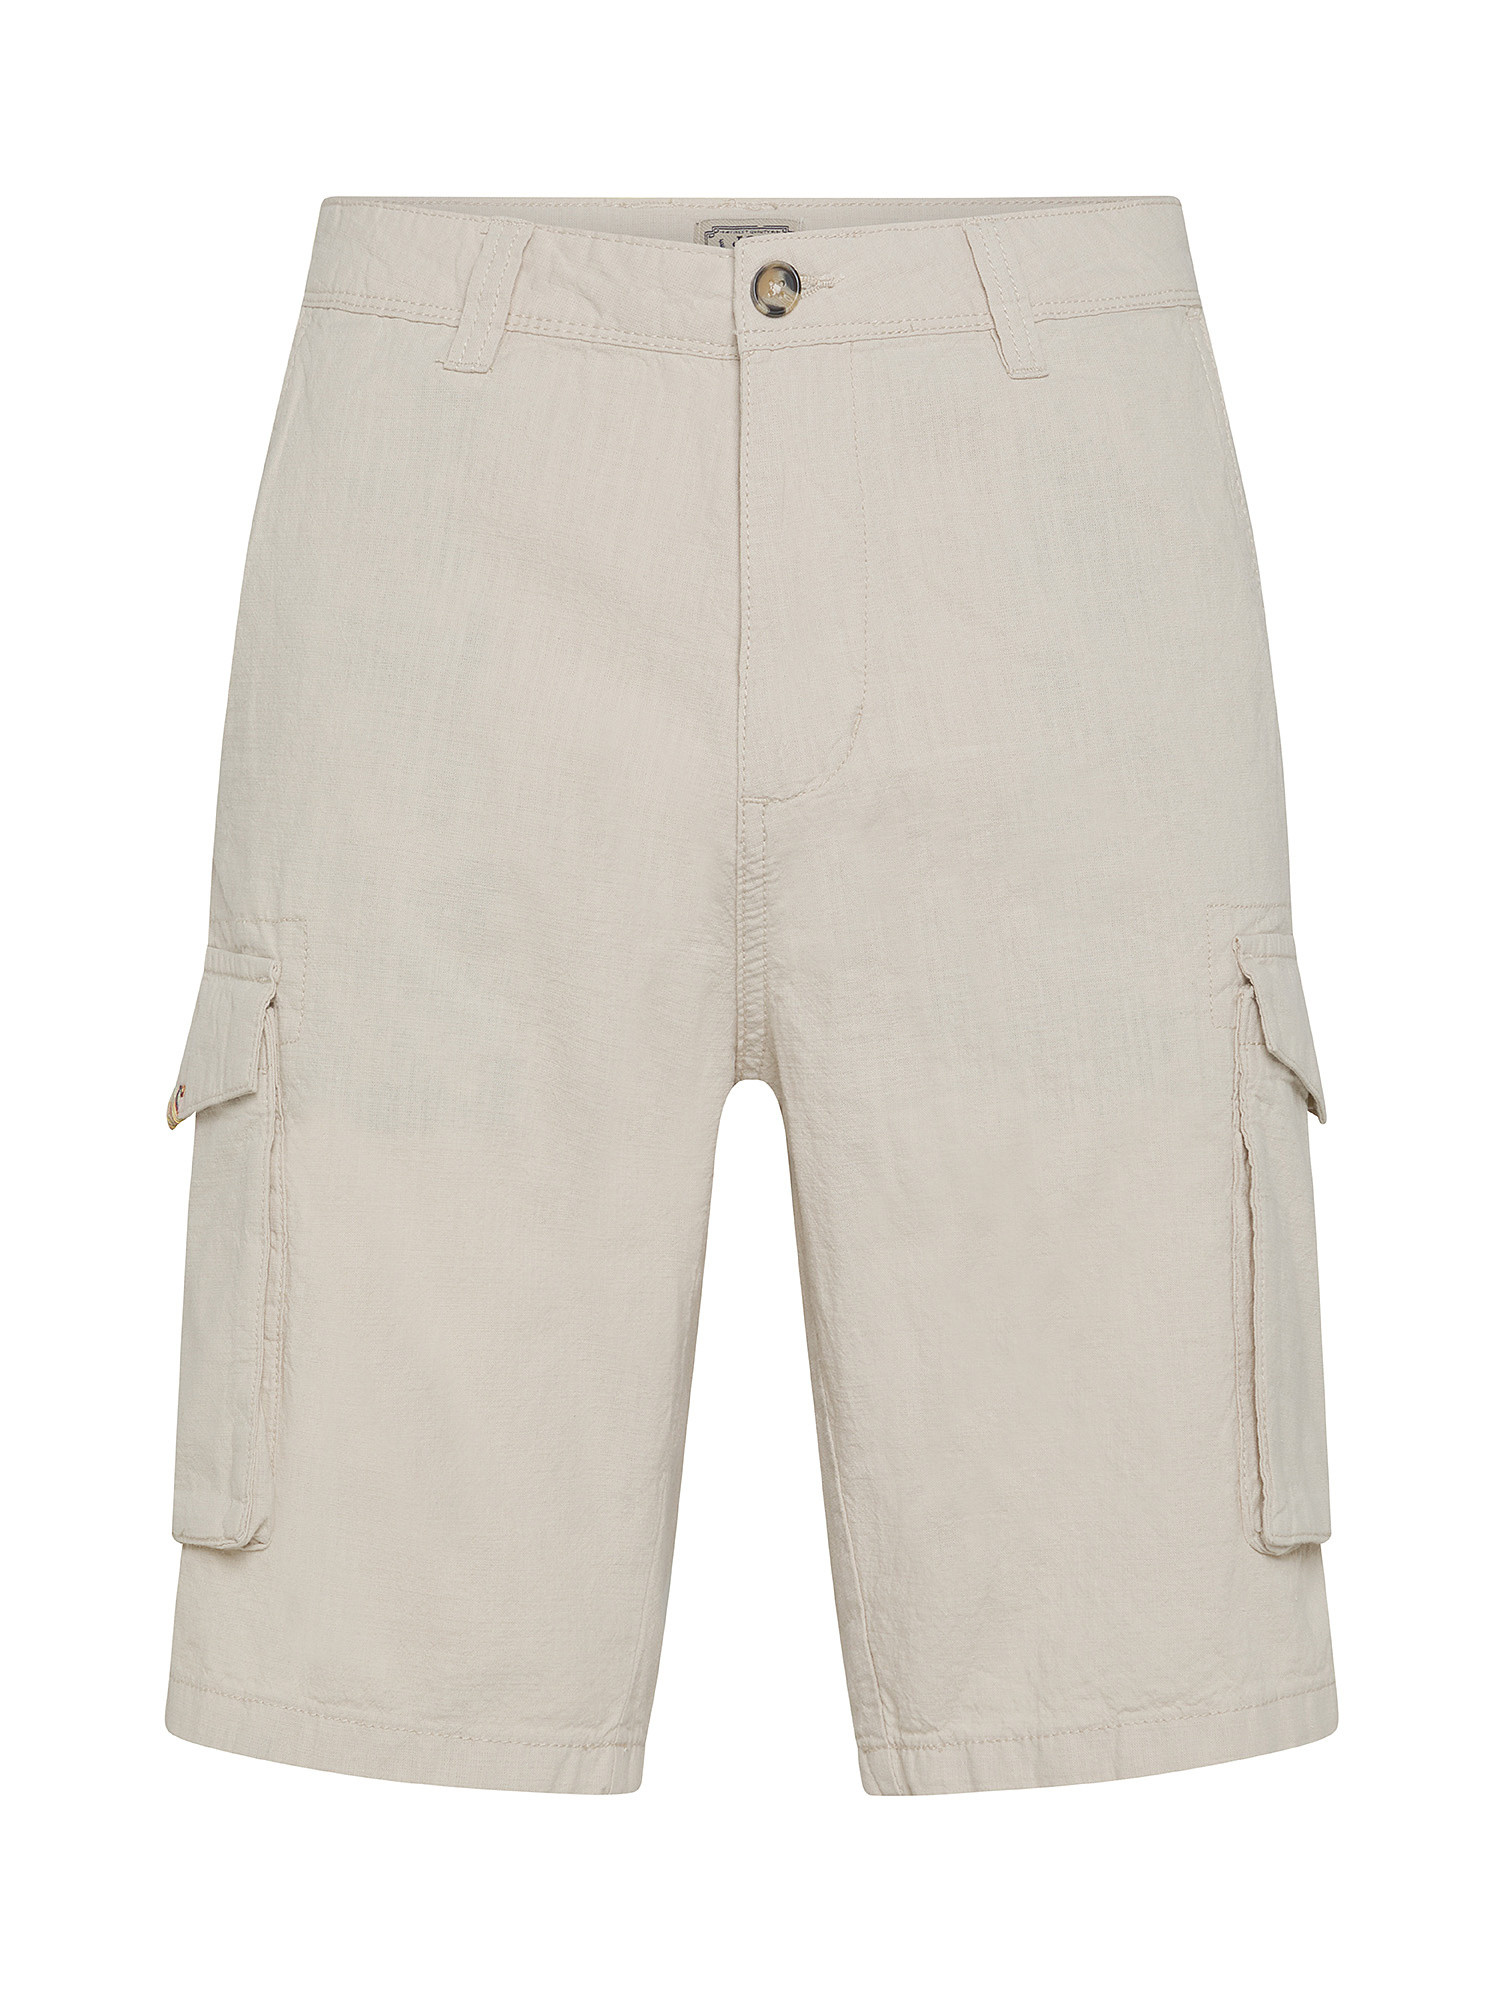 JCT - Cargo bermuda in cotton, Sand, large image number 0